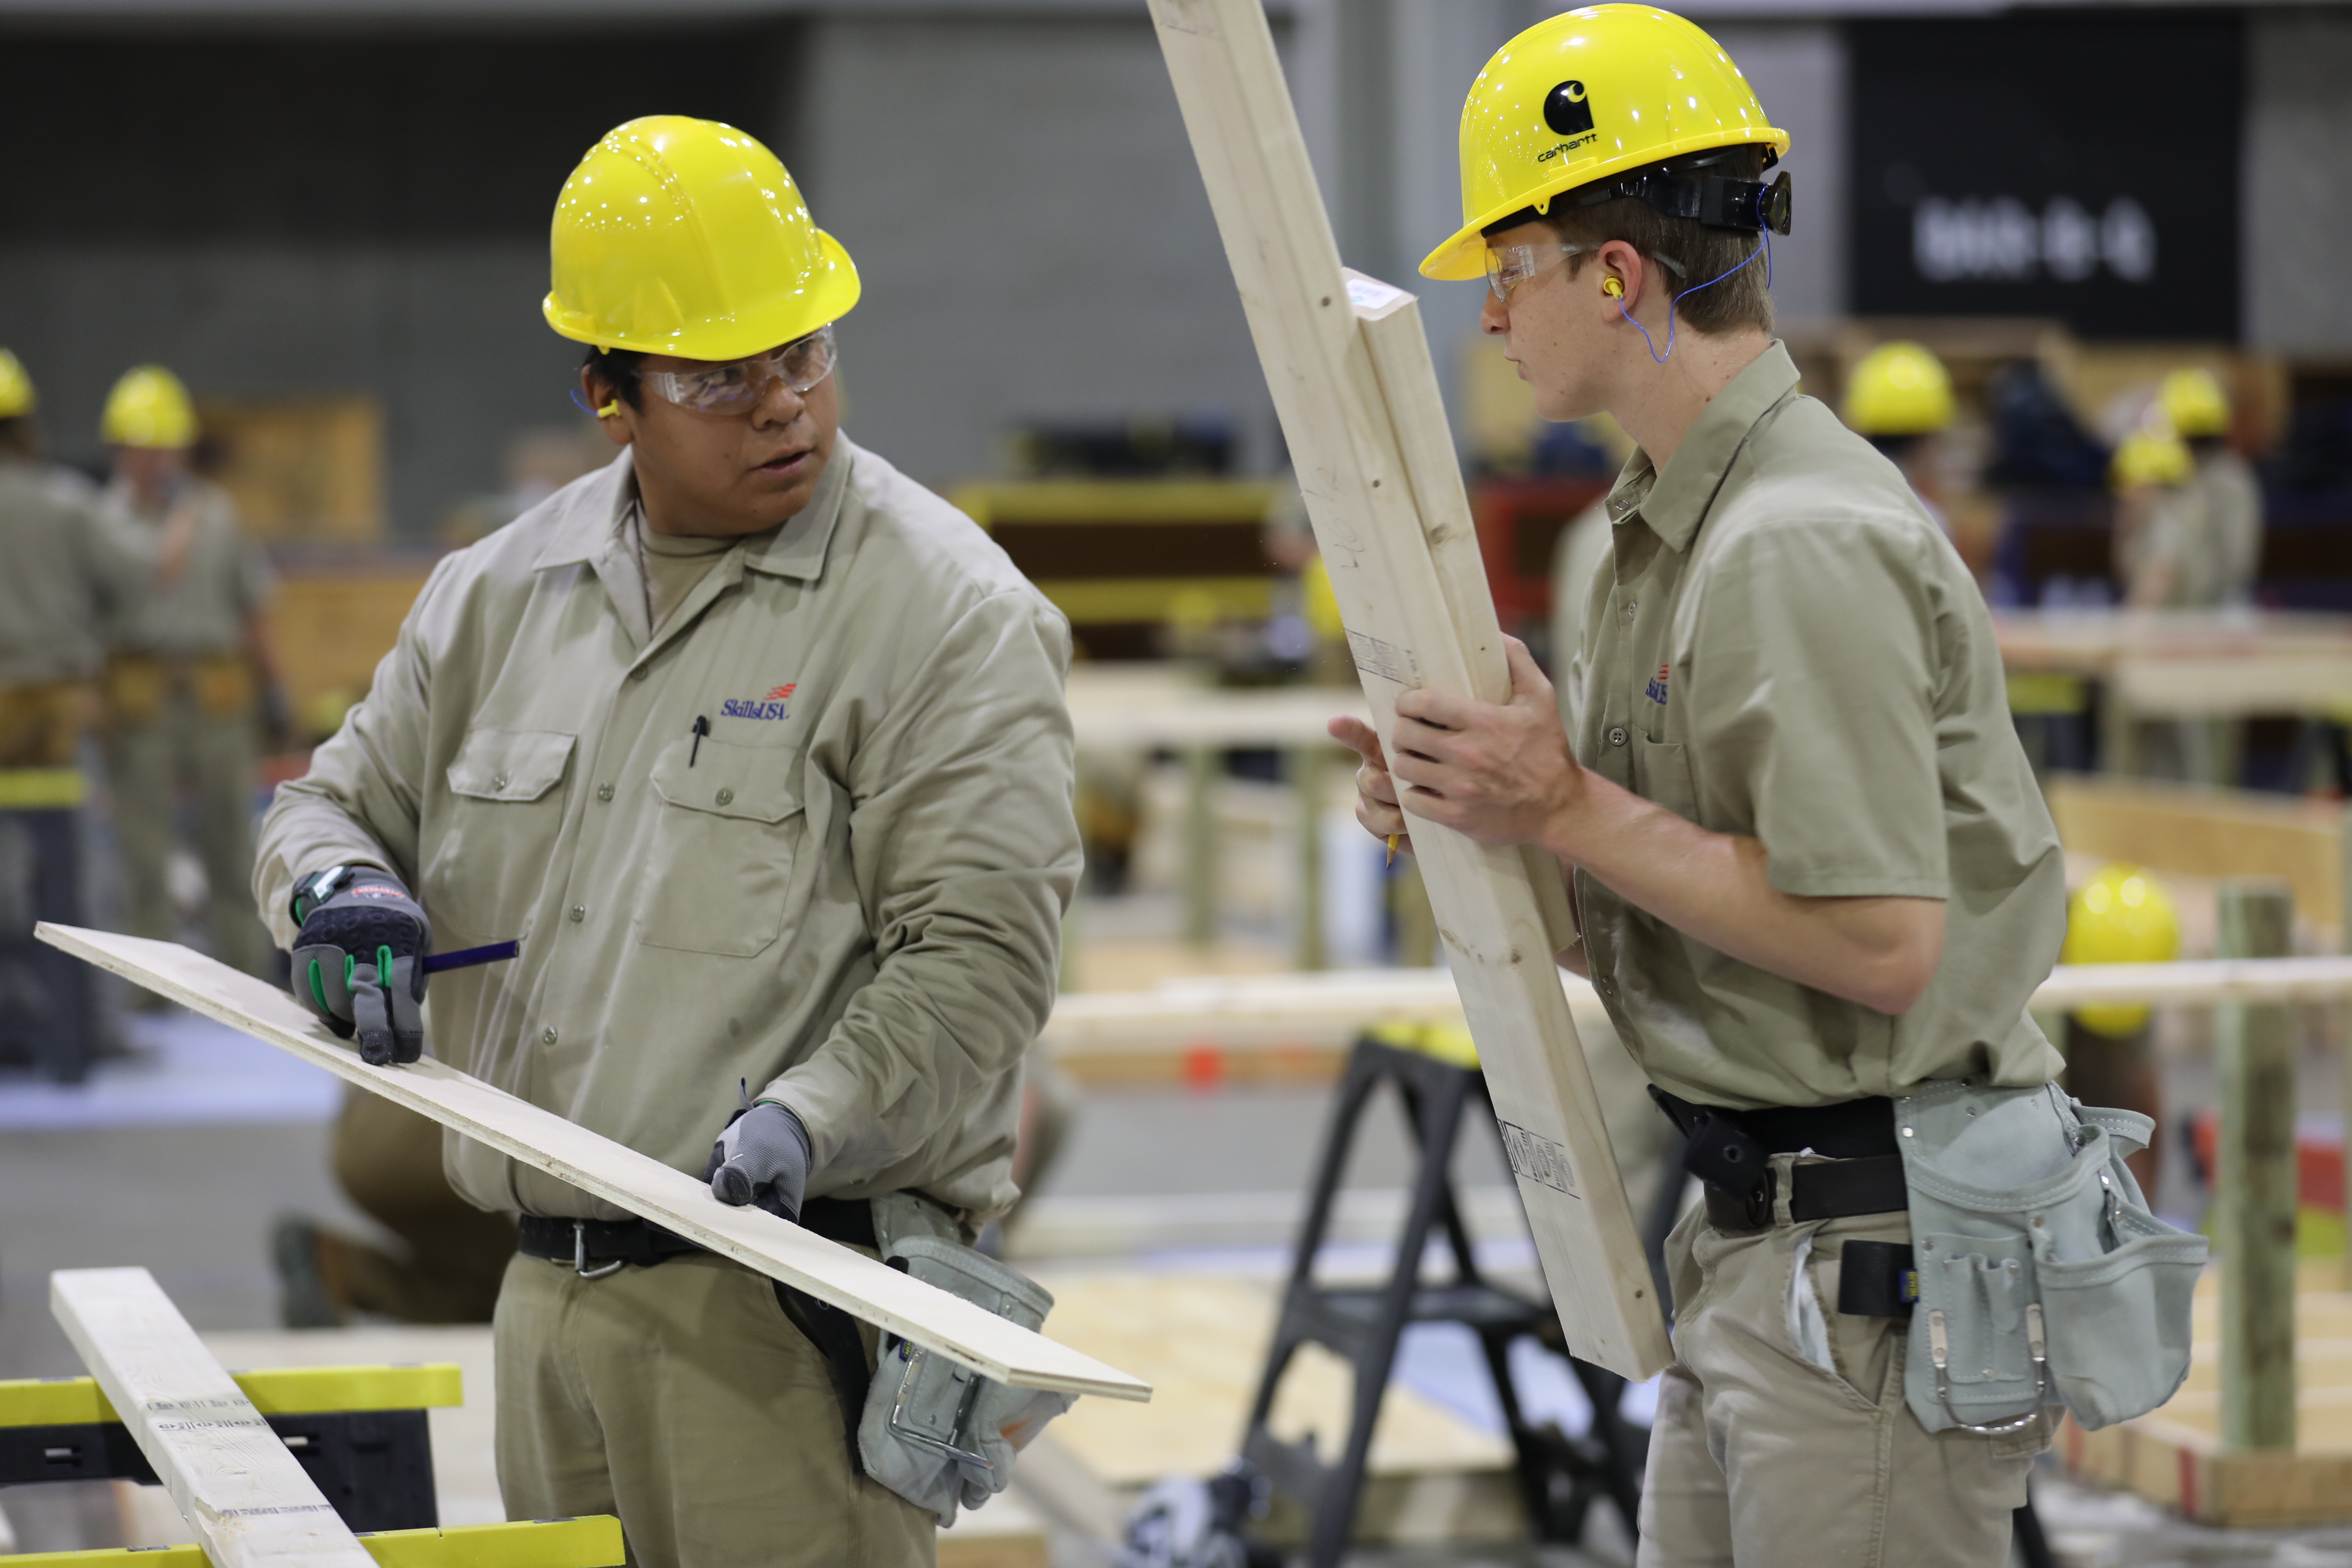 Image of MTC Building Construction team competing in the 2023 SkillsUSA championship.